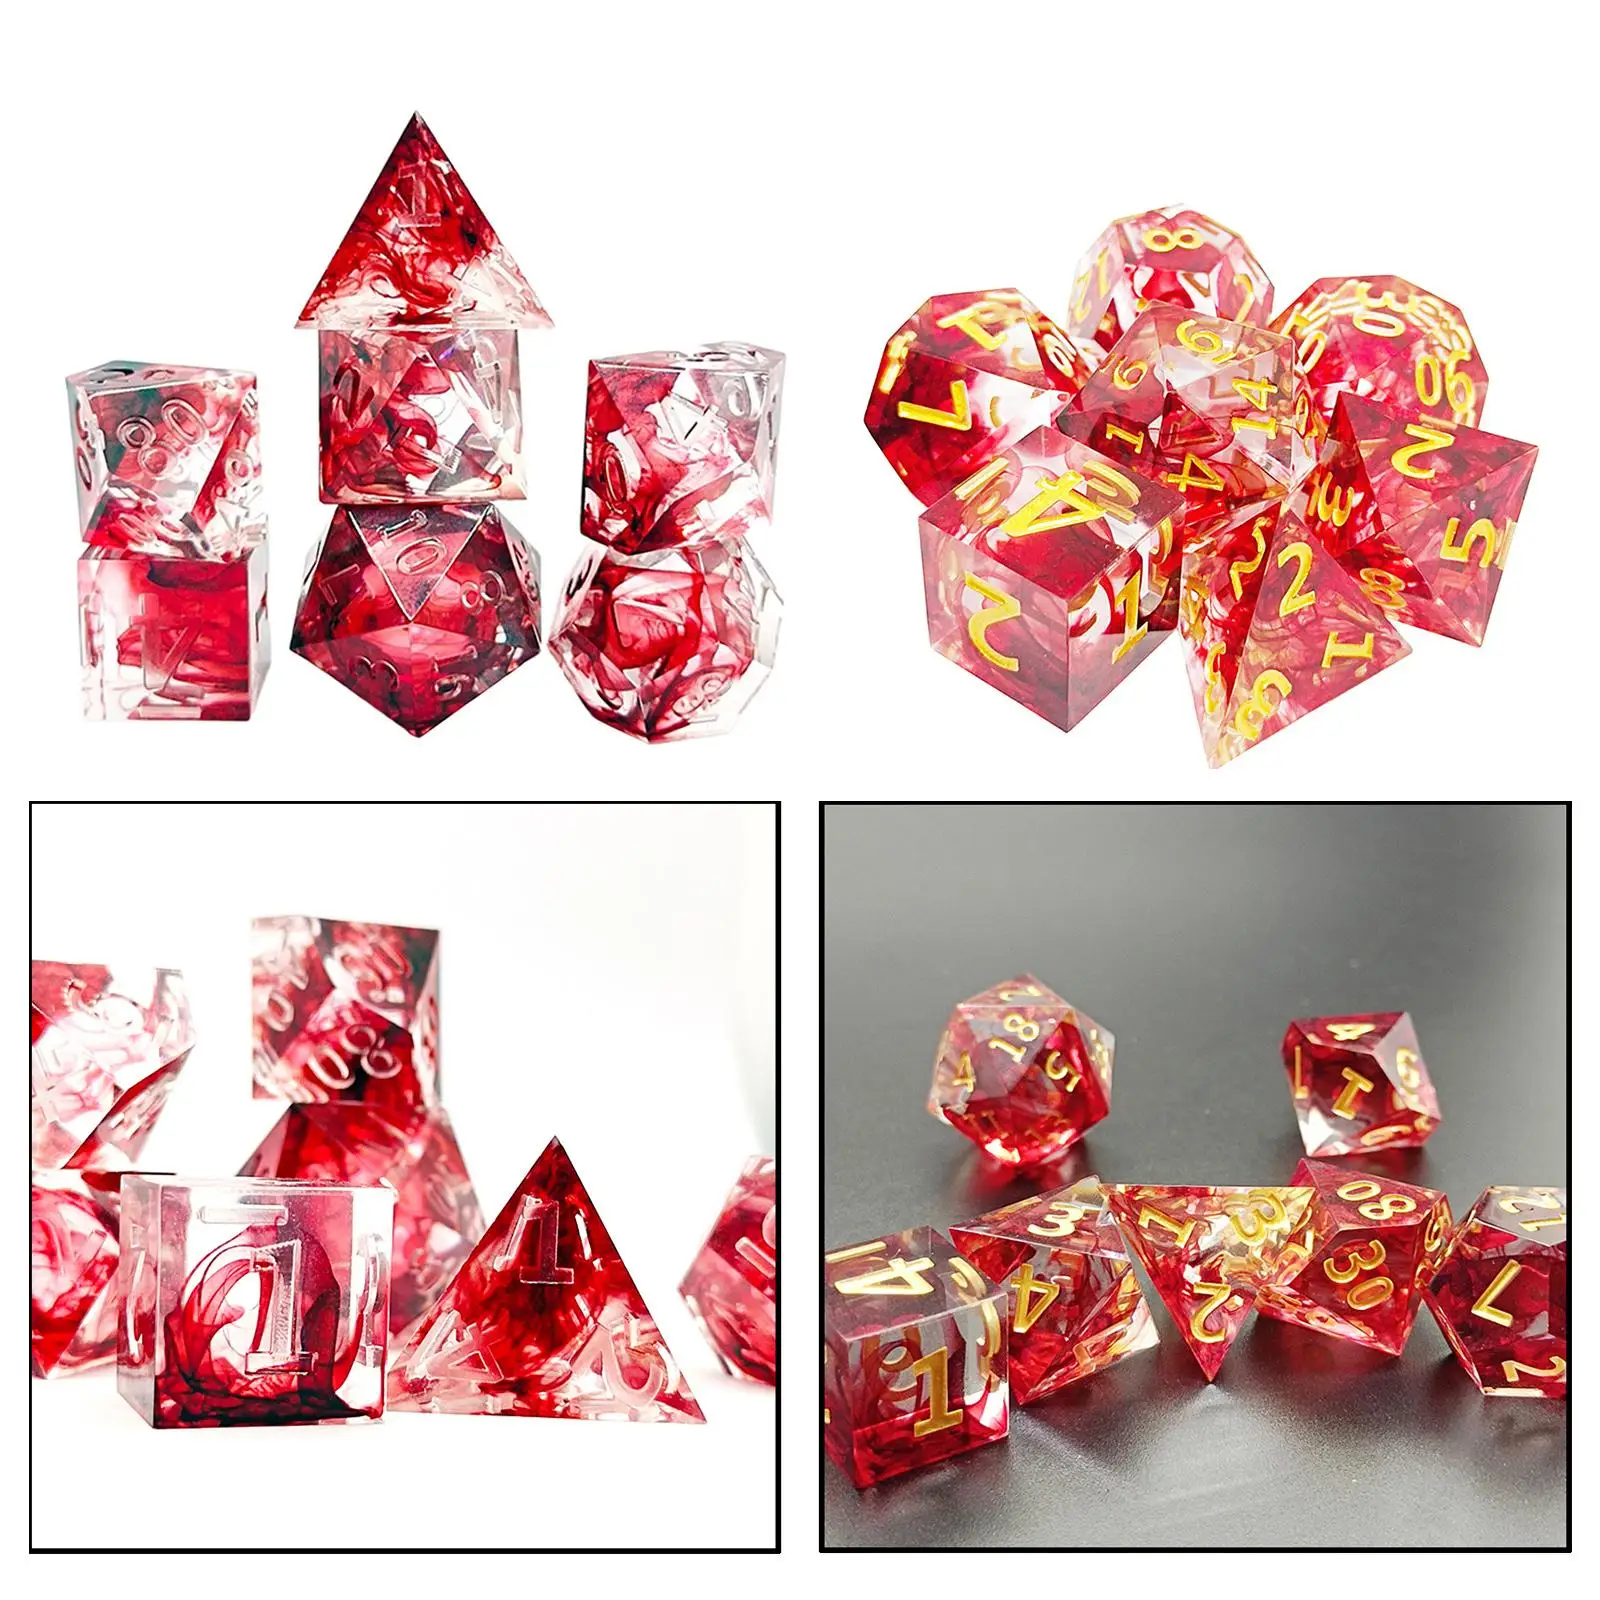 7pcs Blocky Resin Dice Crystal RPG Blood Effect Acute Angle Dice Sets Game Accessories